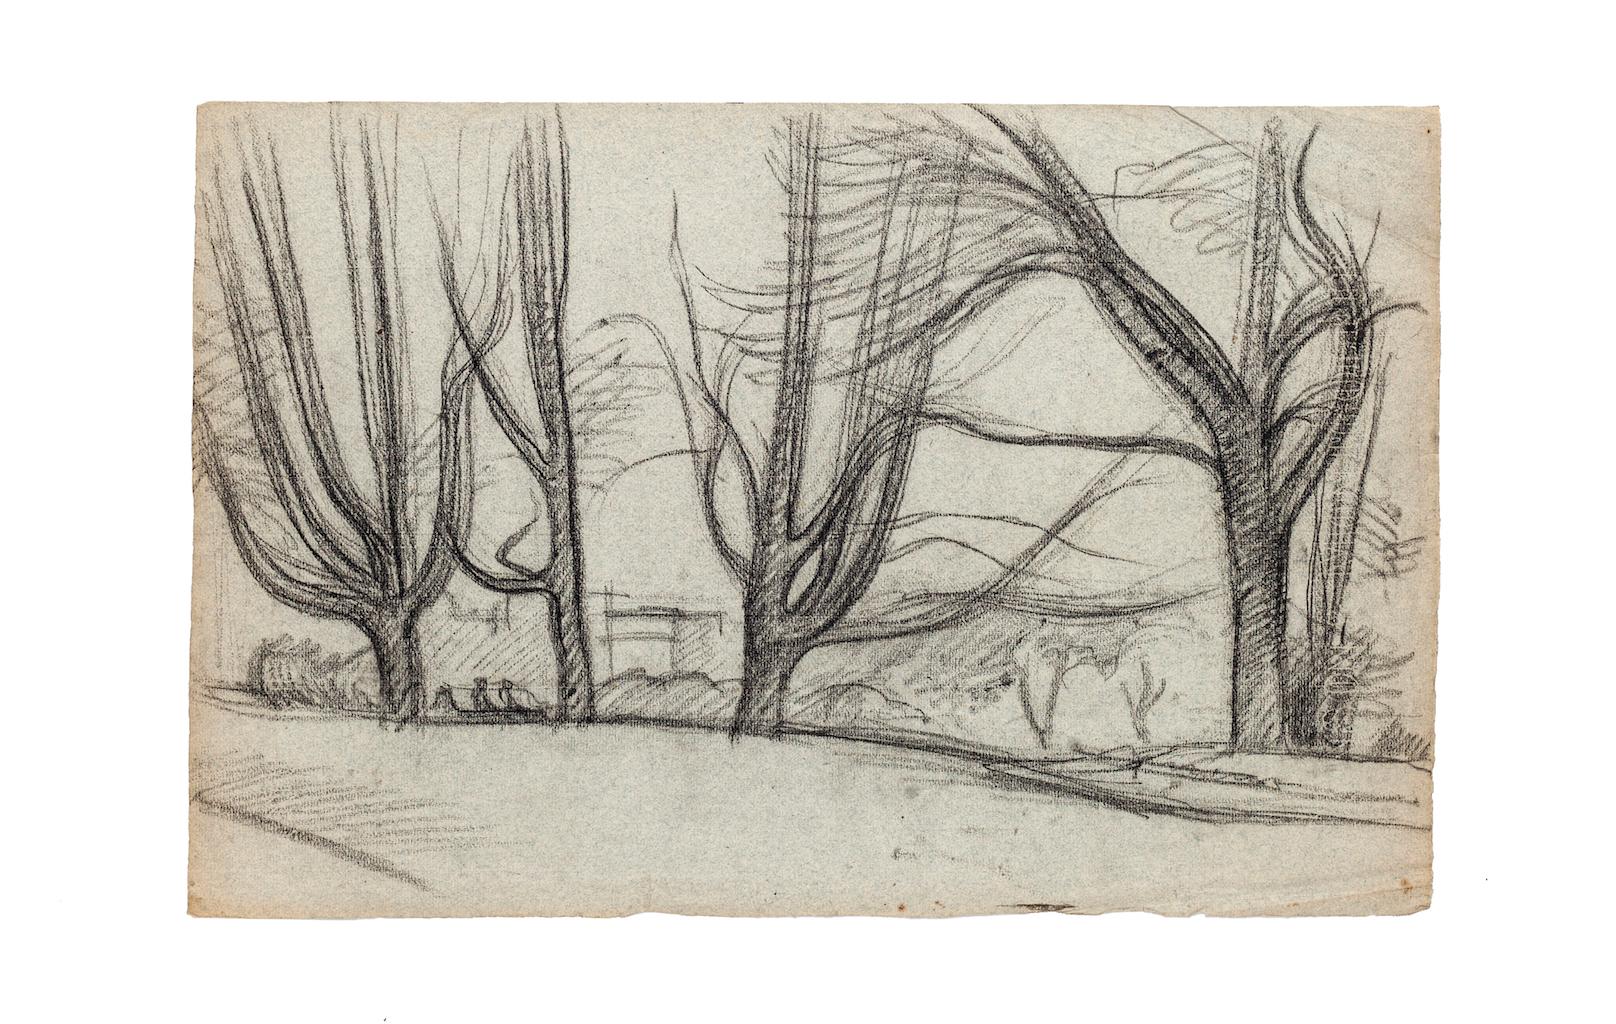 Unknown Landscape Art - Trees - Original Drawing in Pencil and Charcoal - 20th Century